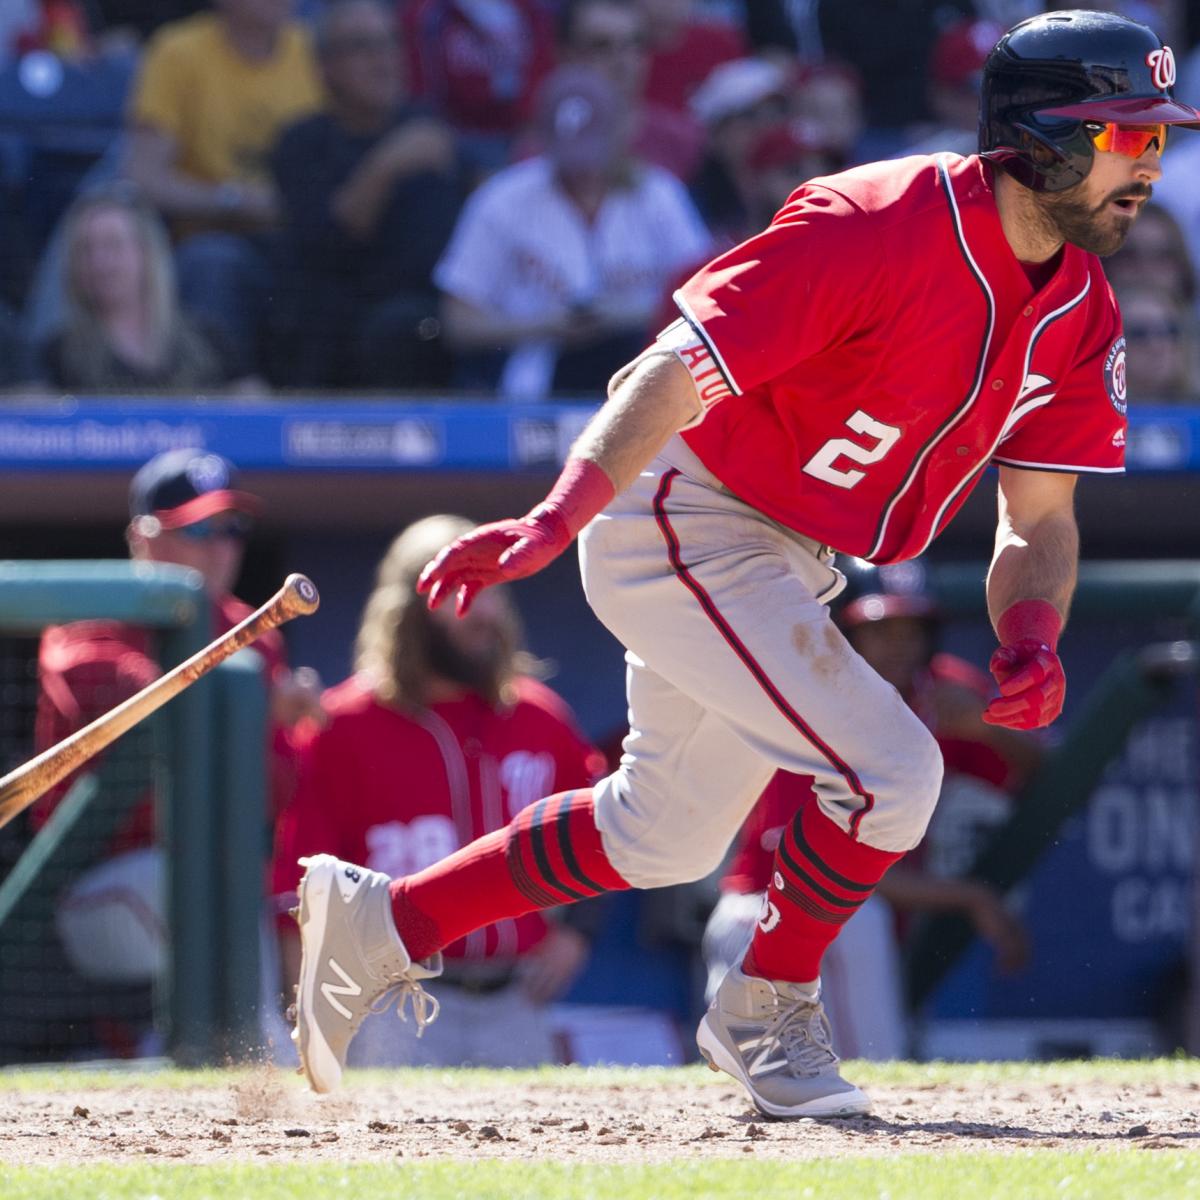 Adam Eaton's Leg Injury Diagnosed as Knee Strain, Placed on 10-Day DL - Bleacher Report